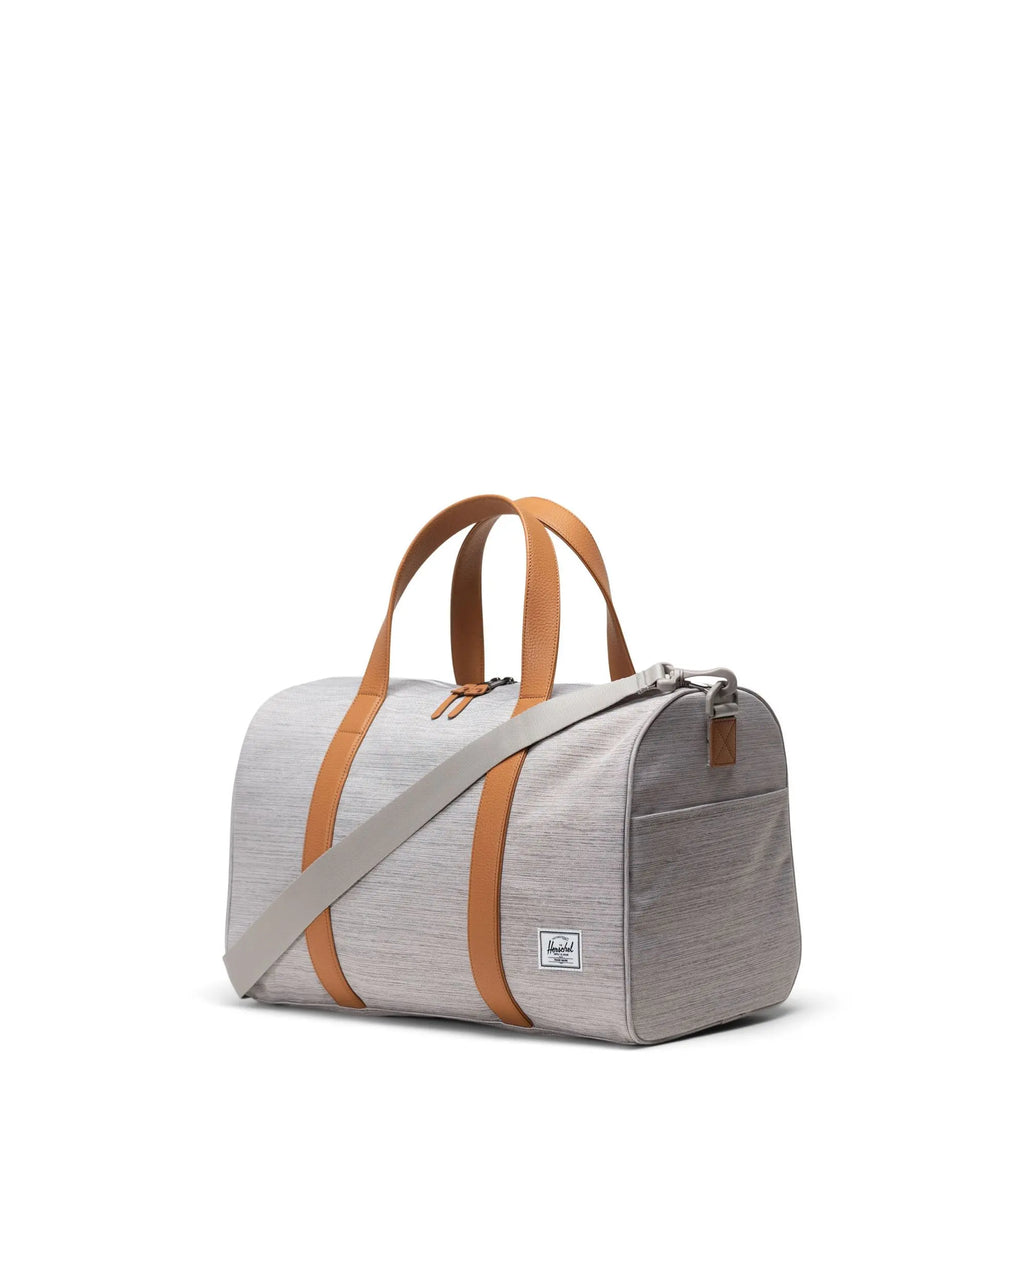 Light heather grey carry on size duffle bag.